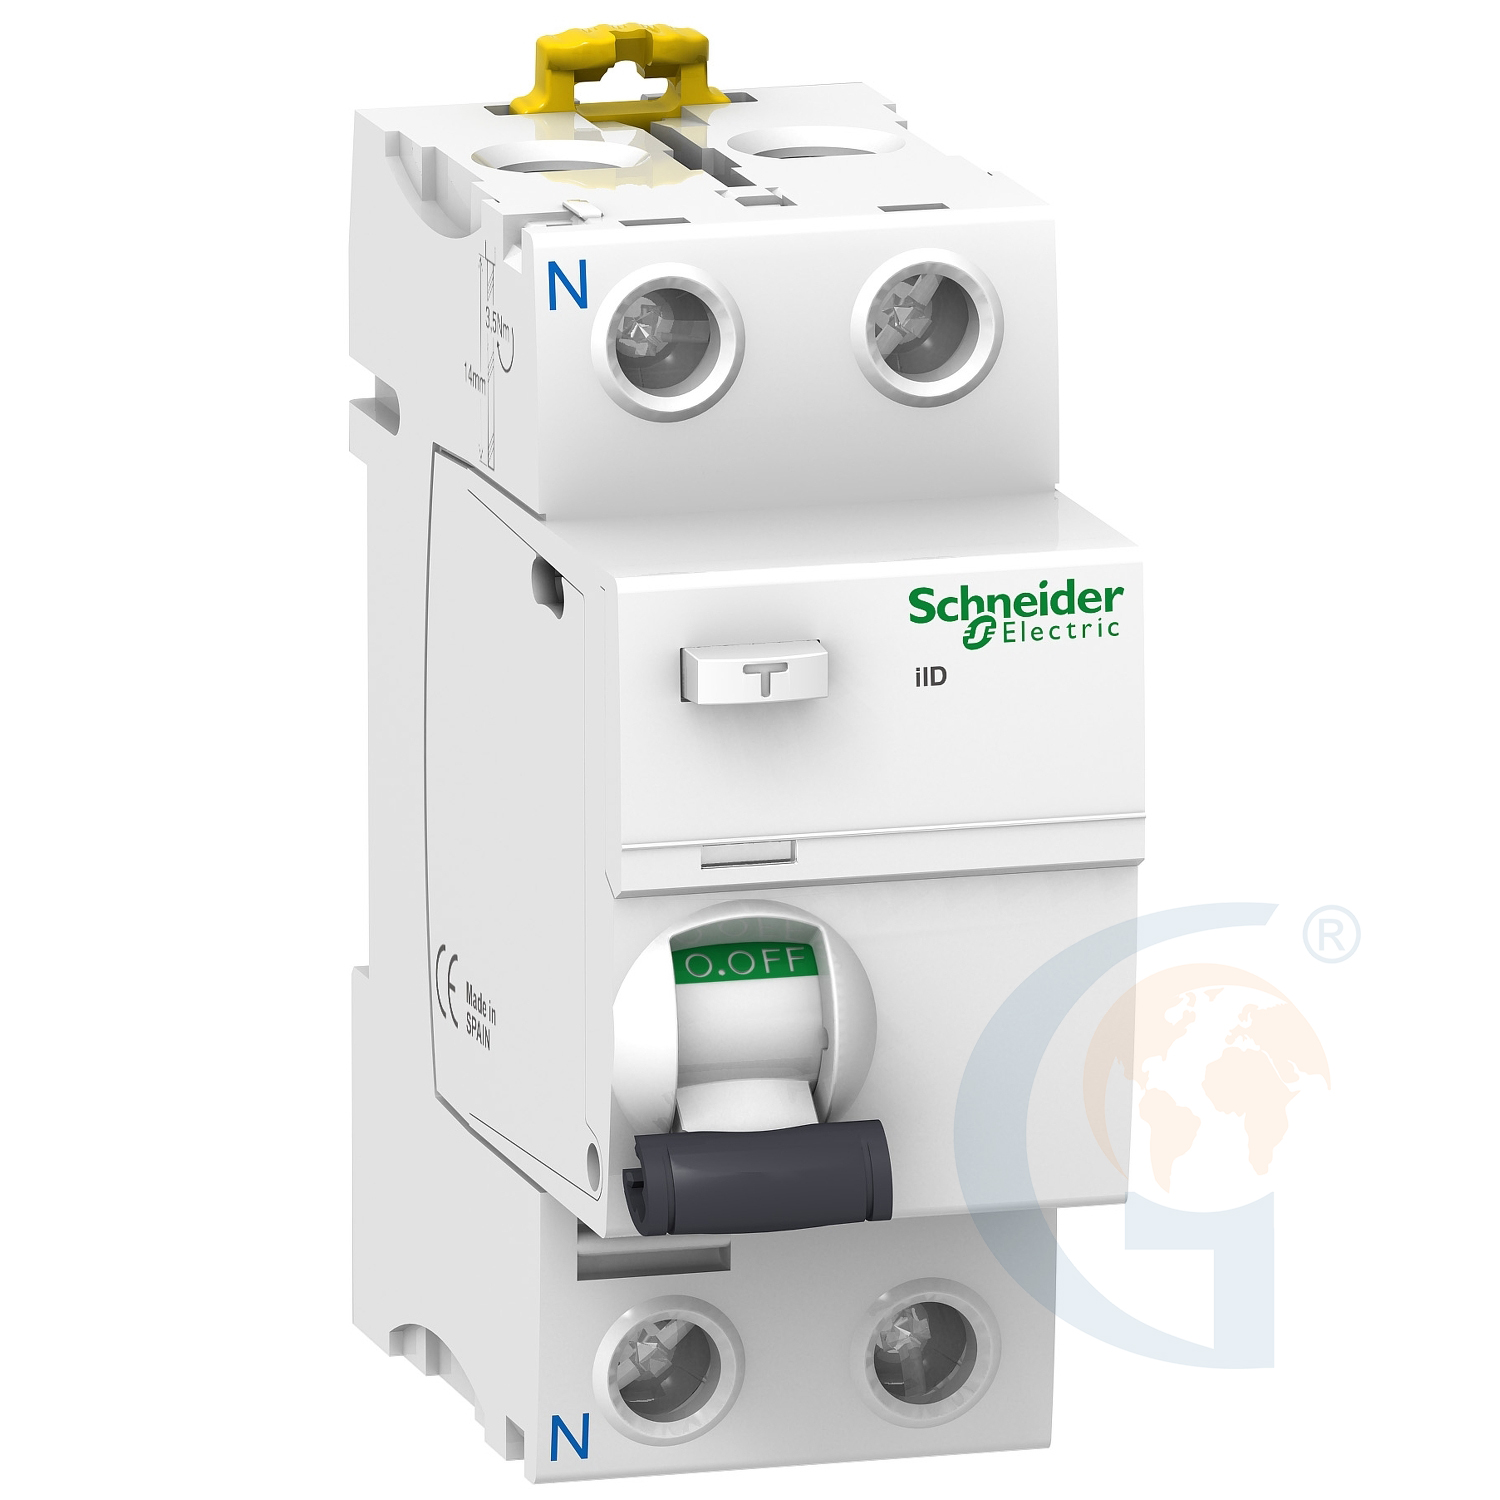 Schneider Electric A9R20225 ACTI 9 IID – RCCB – 2P – 25A – 10MA – TYPE A https://gesrepair.com/wp-content/uploads/2020/Schneider/Schneider_Electric_A9R20225_.jpg